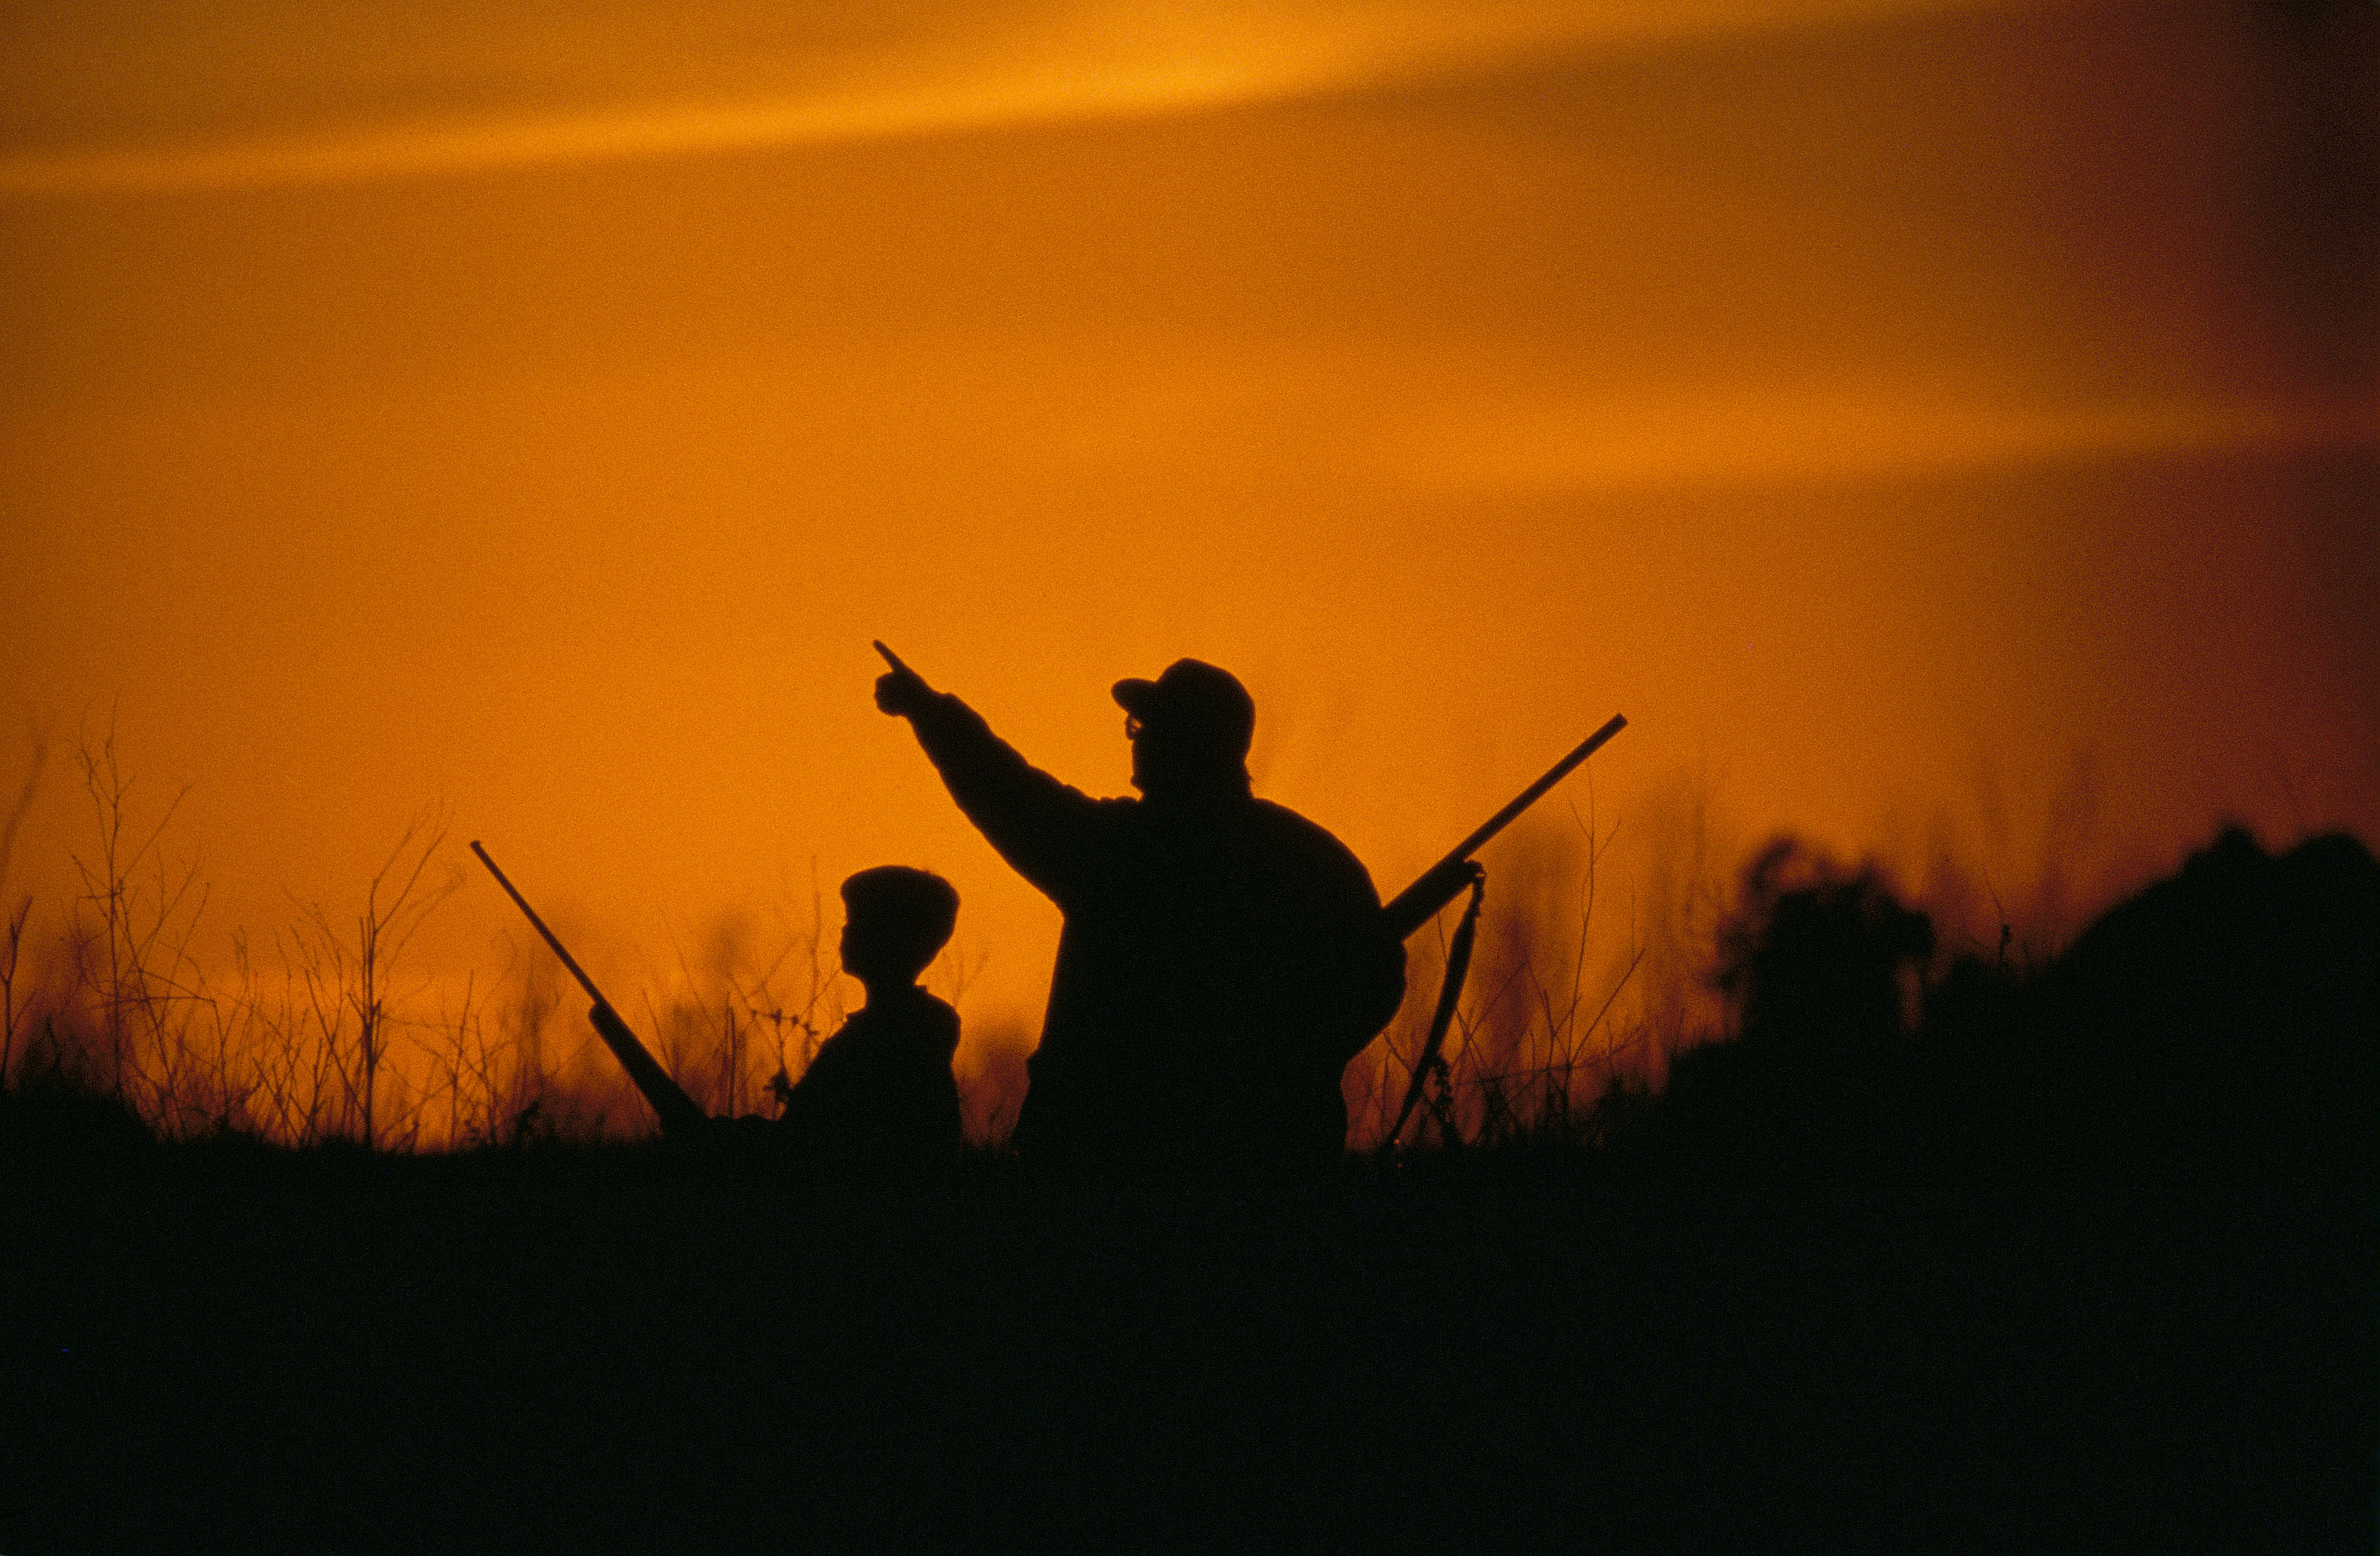 A Hunting And Fishing 'Bill Of Rights'? - Off The Grid News